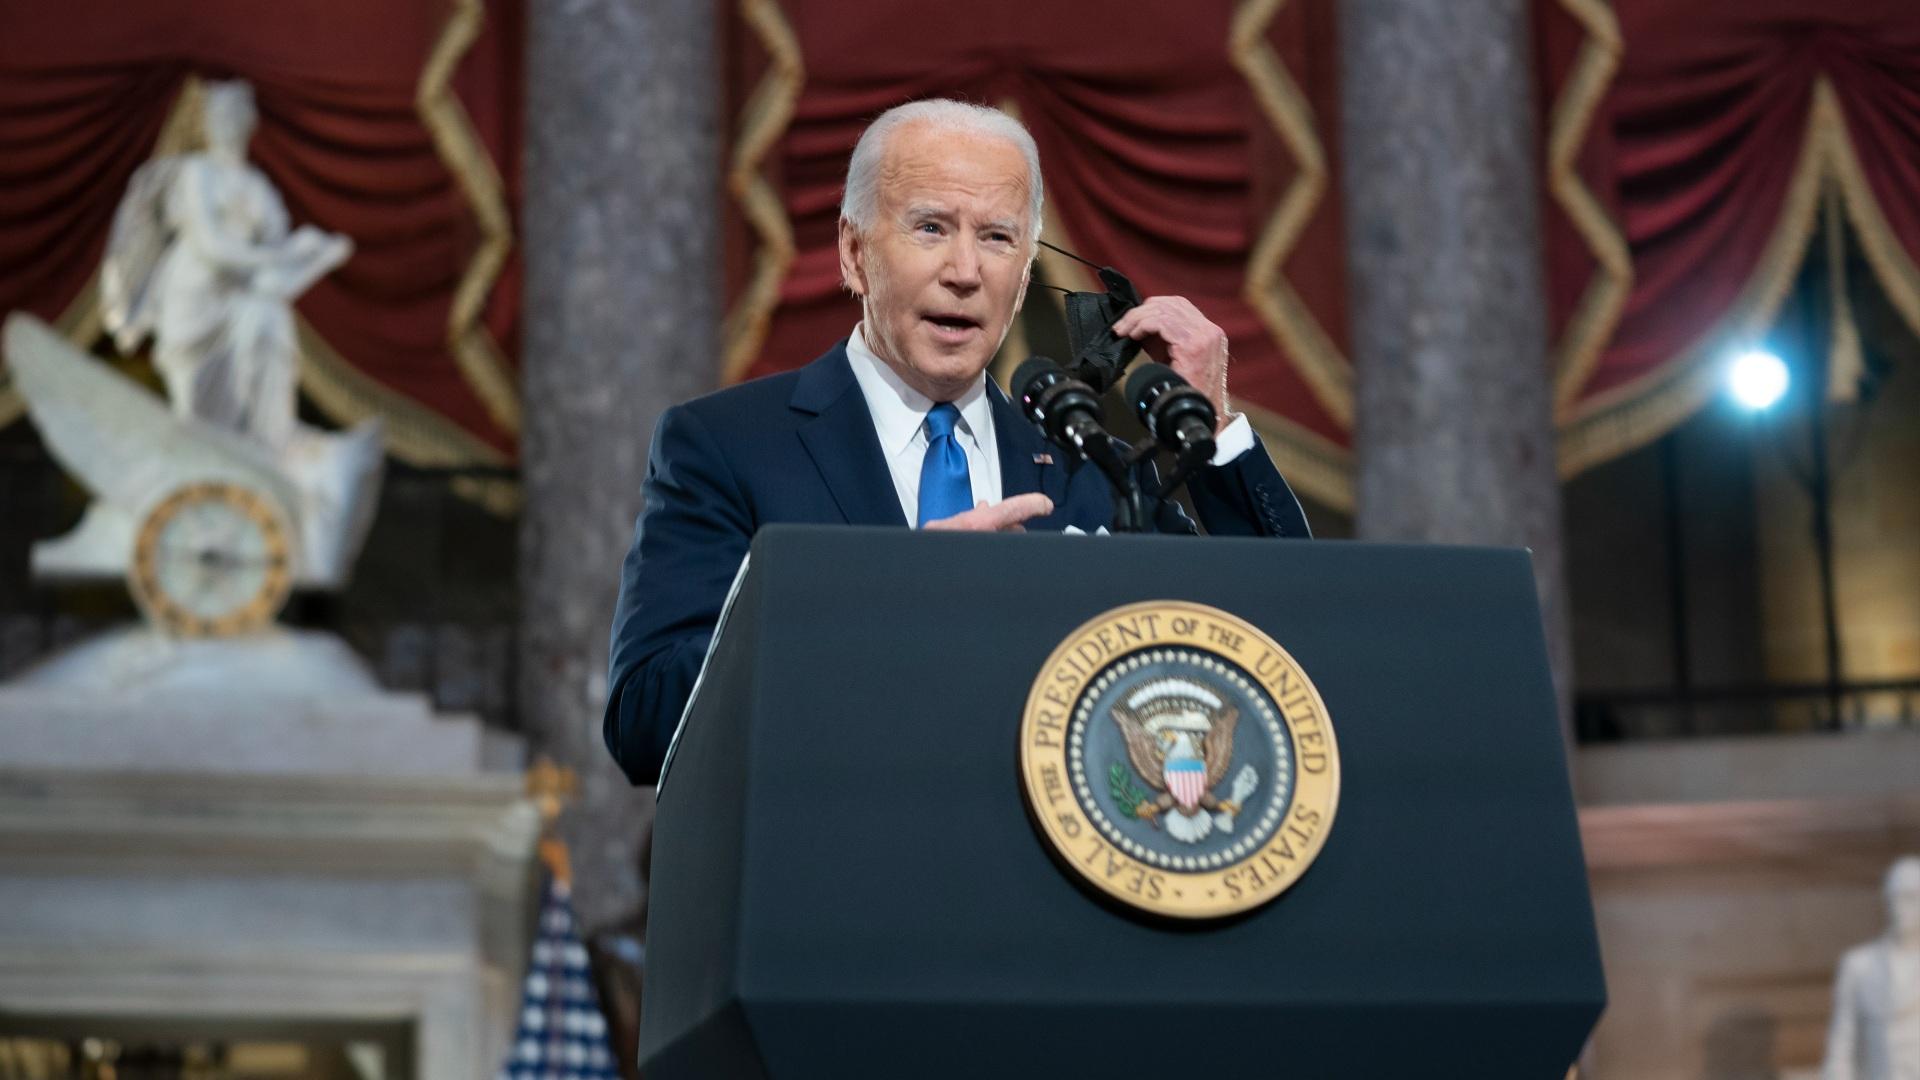 President Joe Biden takes off his face mask as he speaks from Statuary Hall at the U.S. Capitol to mark the one-year anniversary of the Jan. 6 riot at the Capitol by supporters loyal to then-President Donald Trump, Thursday, Jan. 6, 2022, in Washington. (Greg Nash / Pool via AP)